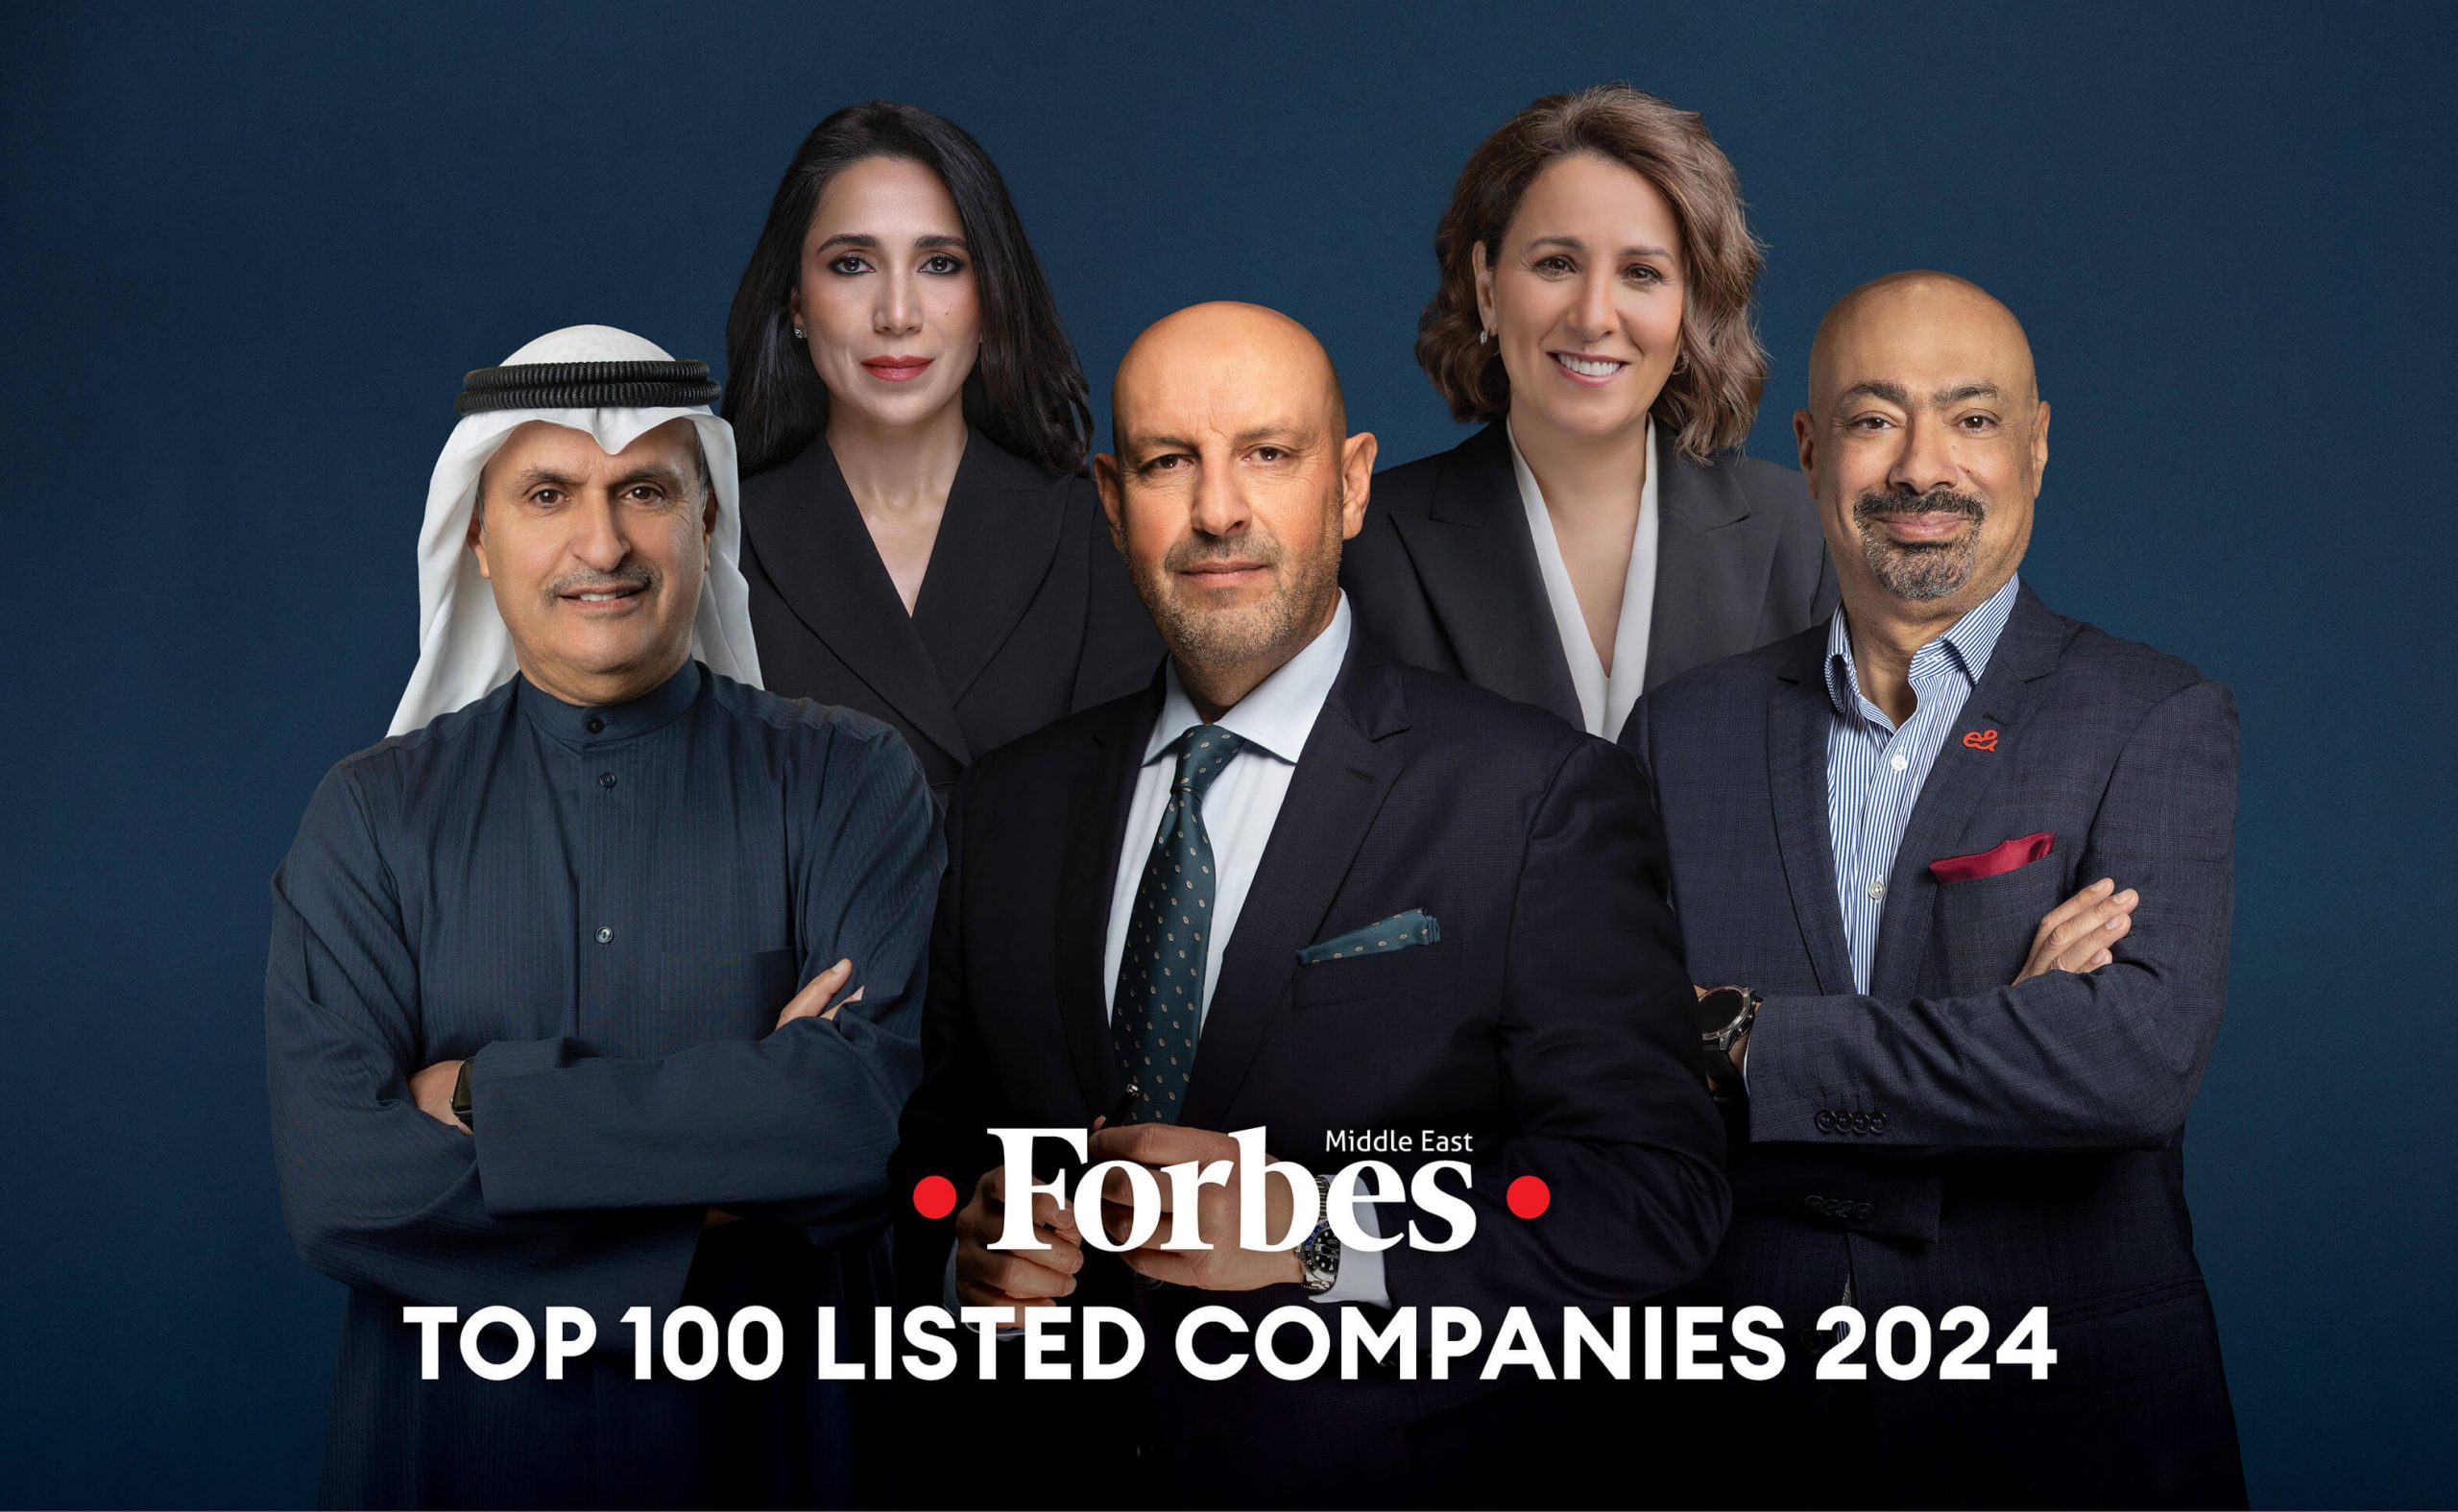 Qatar National Bank secures fourth spot on Forbes Middle East ‘Top 100 Companies’ list